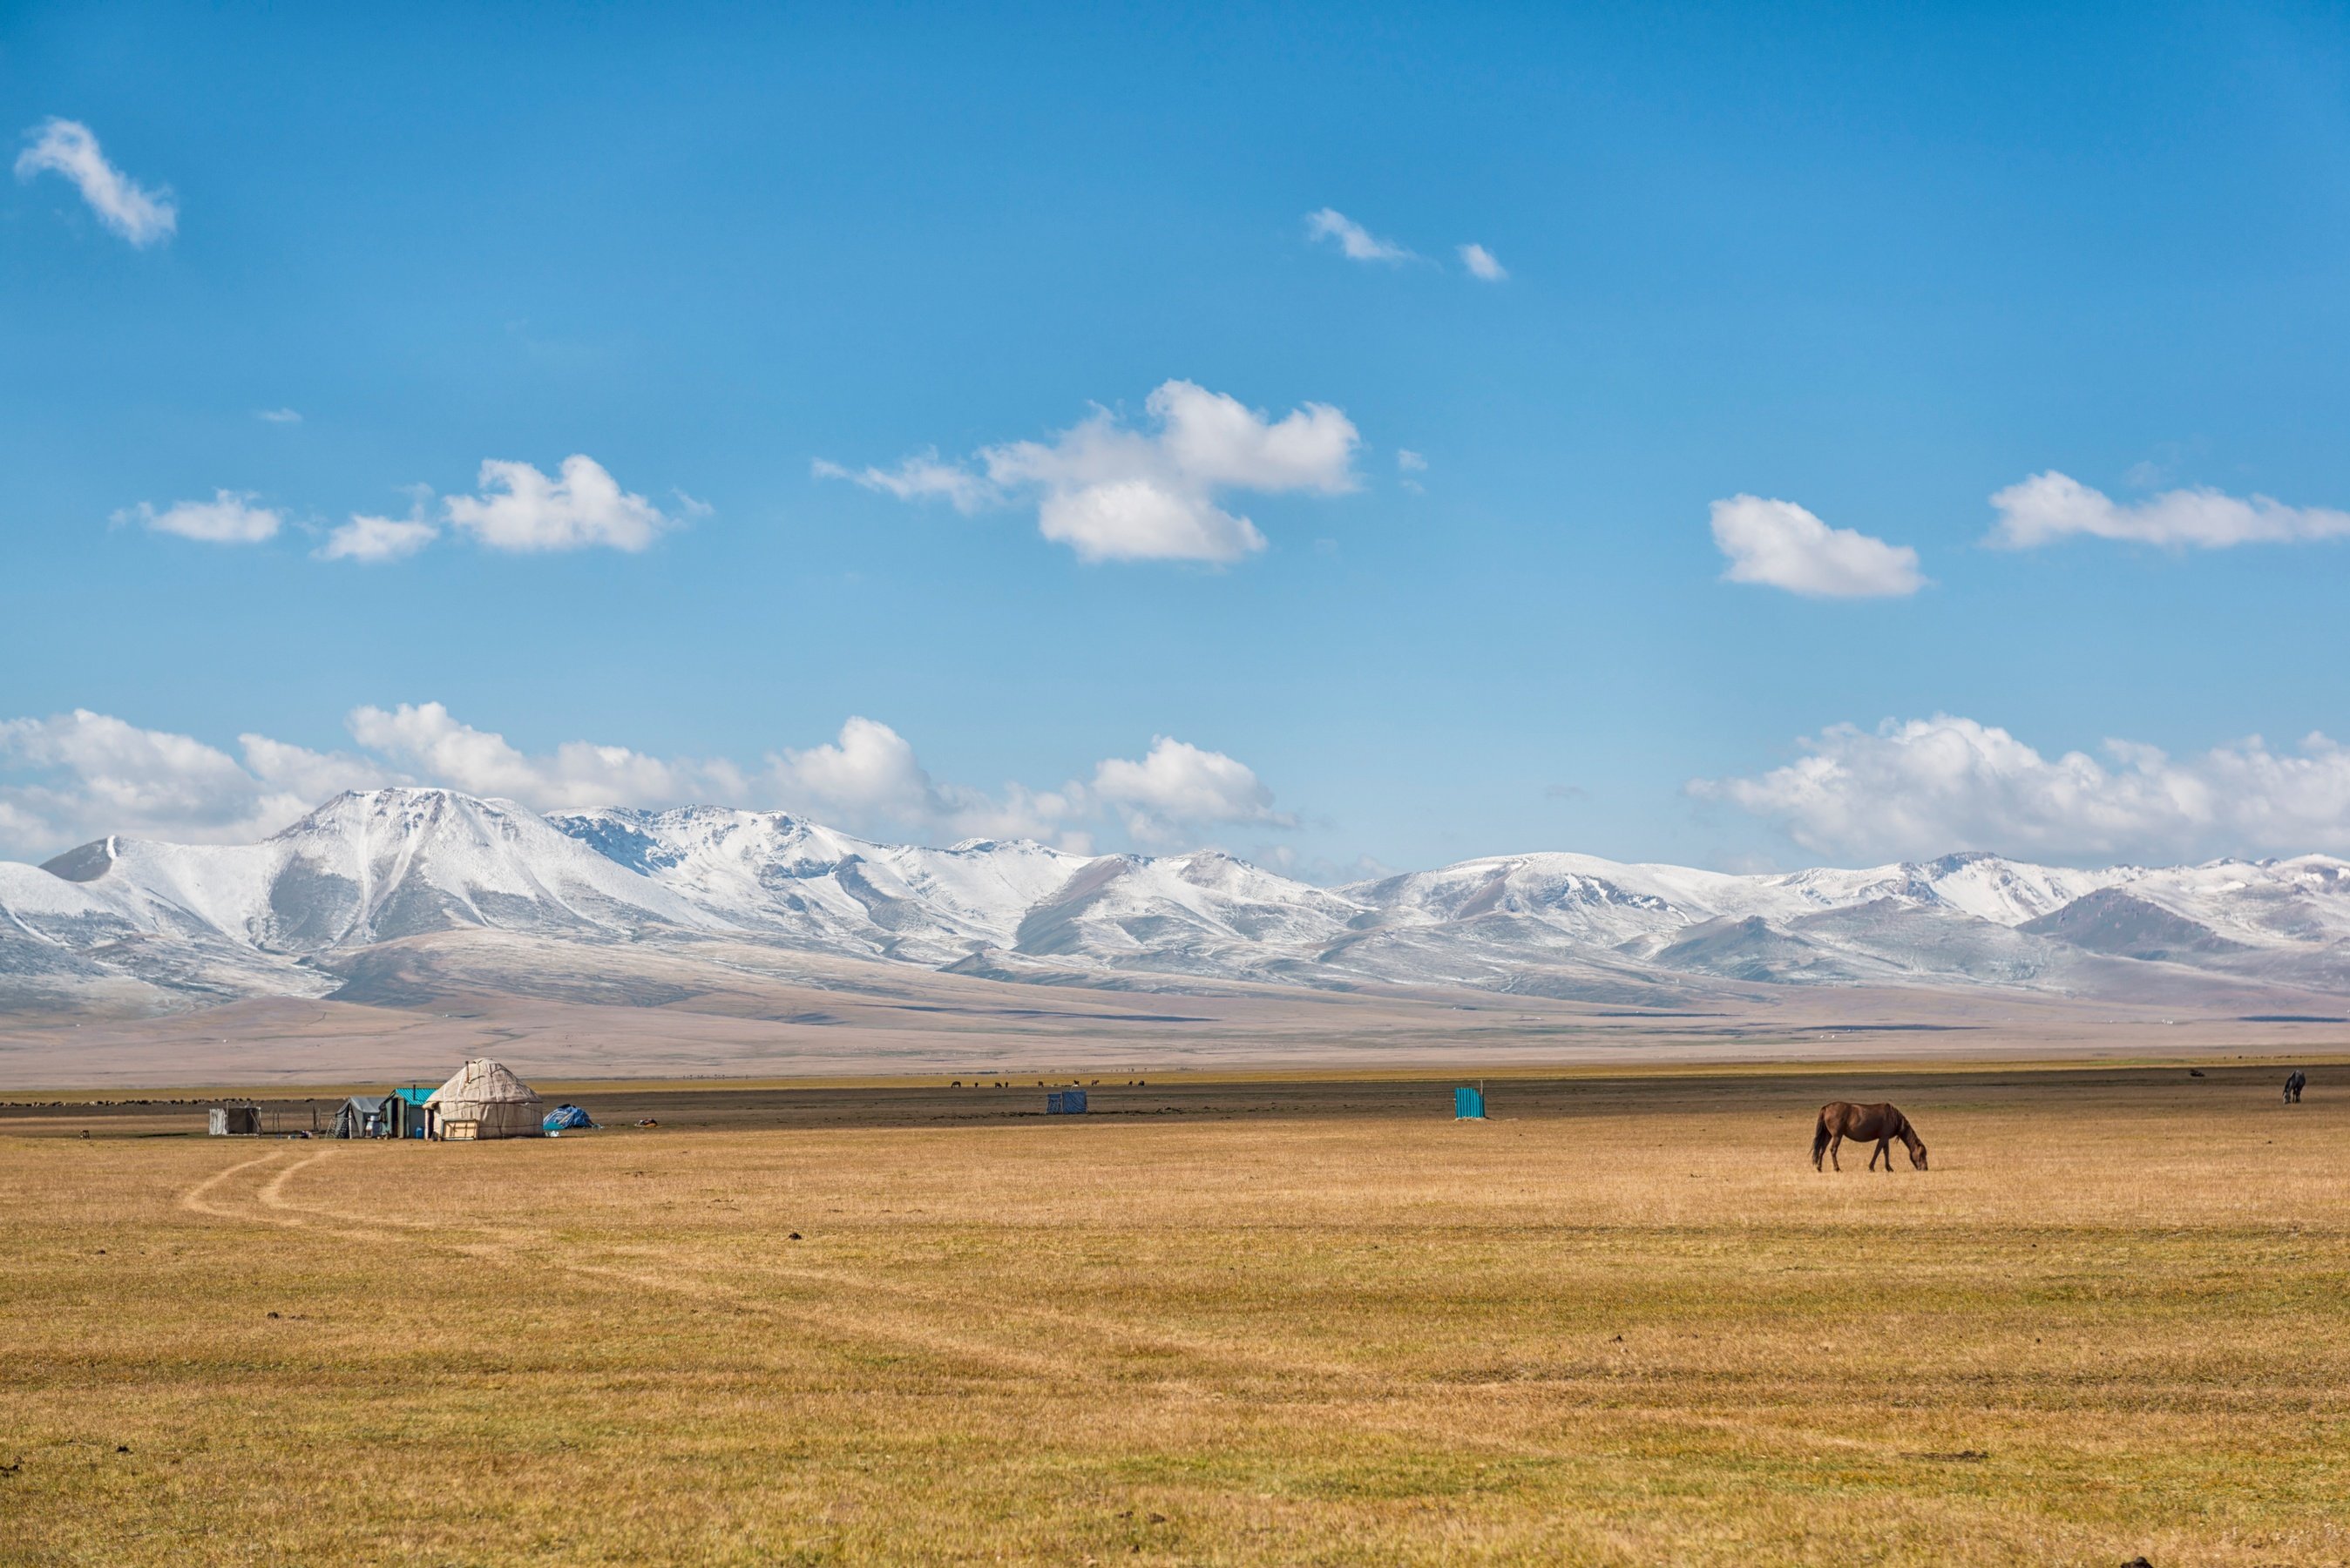 A horse grazing on a flat plain by a small yurt encampment, with the Tian Shan mountains of Kyrgyzstan in the background